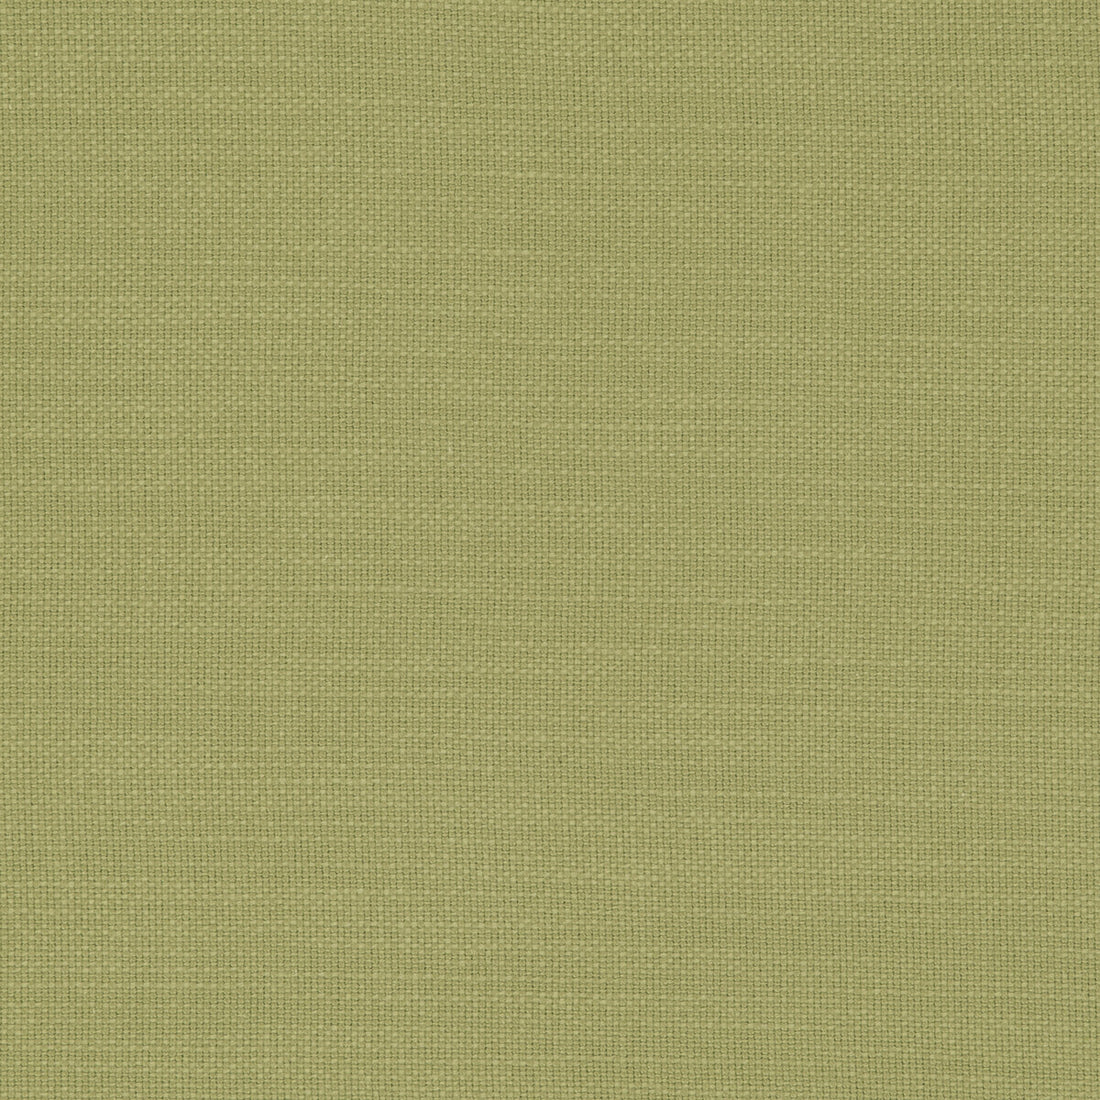 Nantucket fabric in willow color - pattern F0594/56.CAC.0 - by Clarke And Clarke in the Clarke &amp; Clarke Nantucket collection